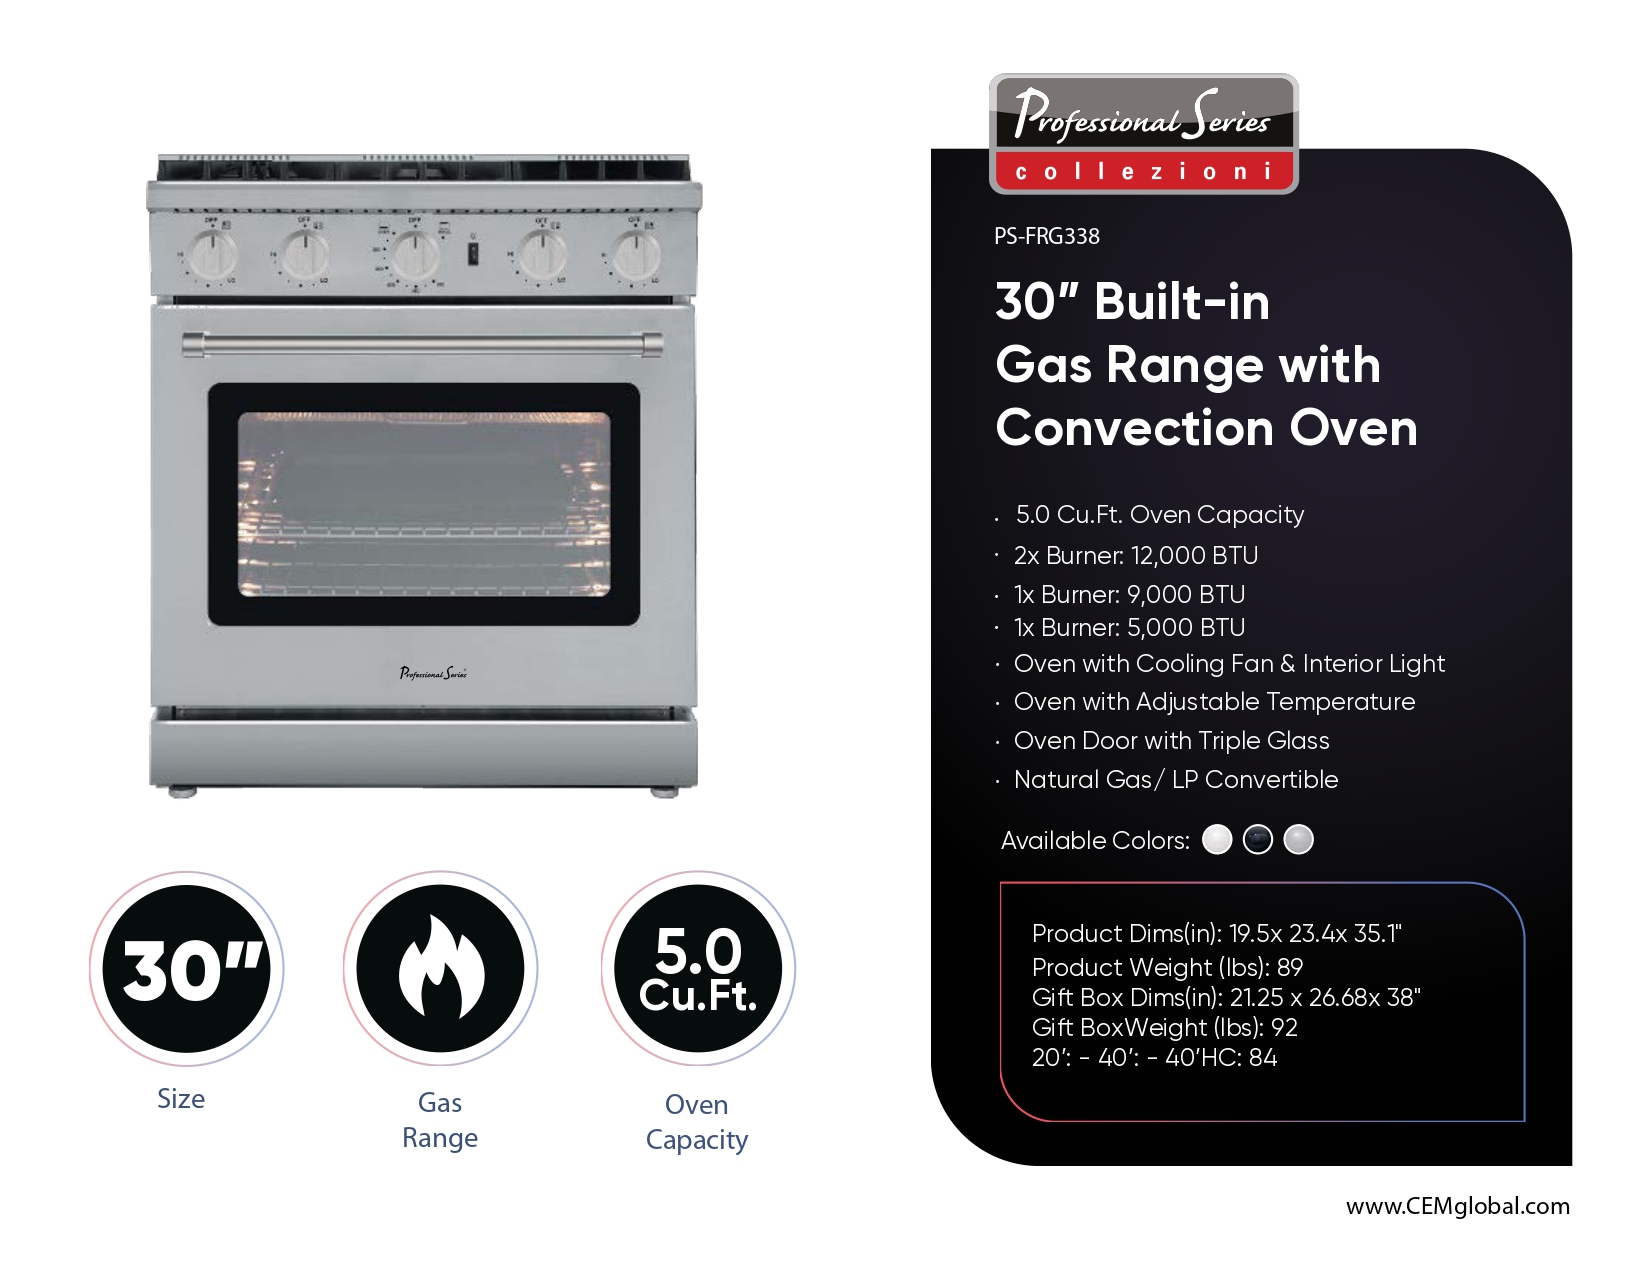 30” Built-in Gas Range with Convection Oven